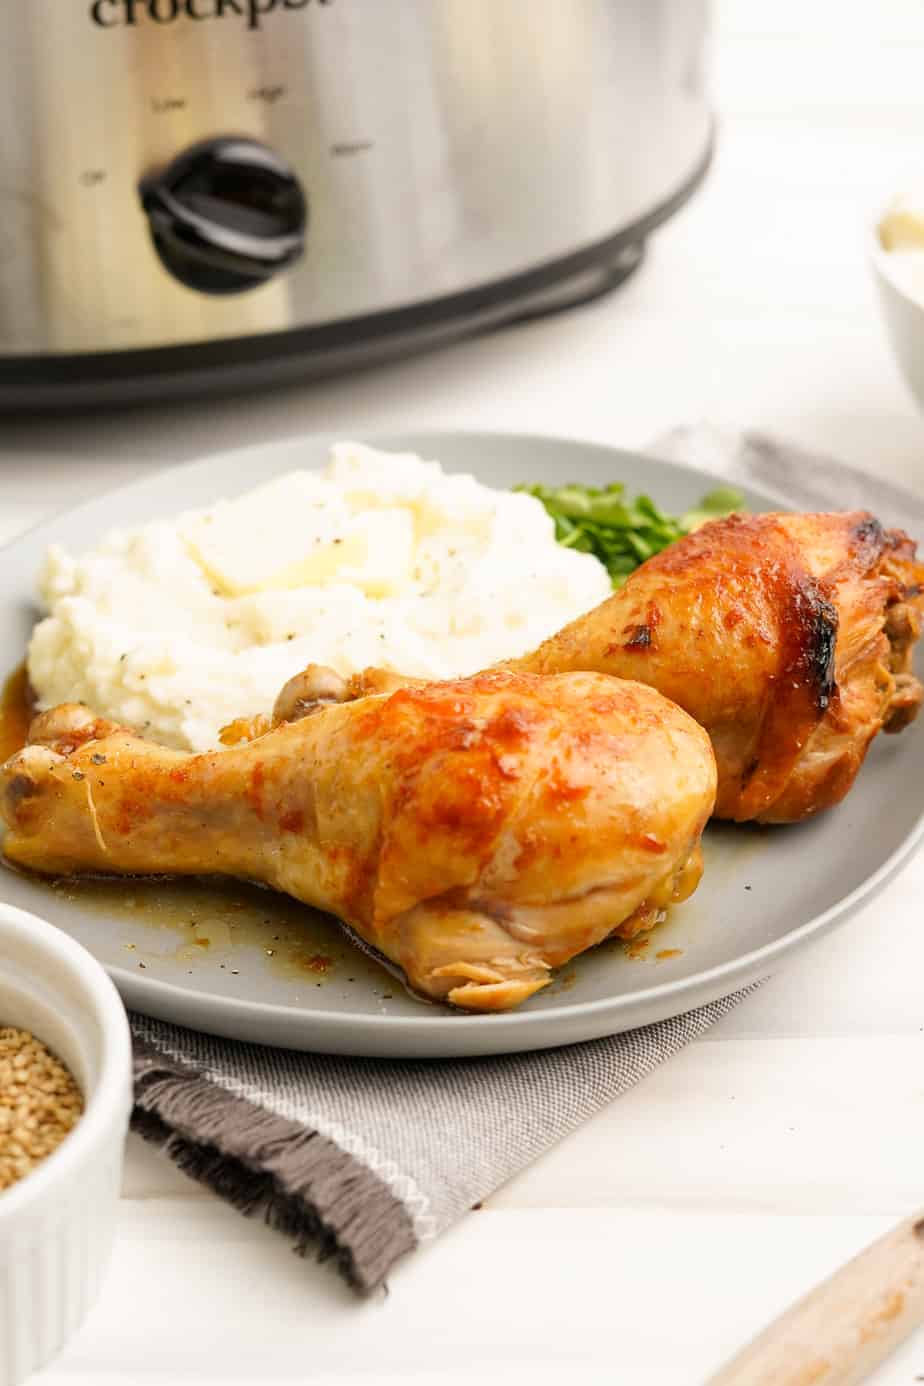 Two chicken drumsticks on a plate with mashed potatoes and a green vegetable from the side. A slowcooker sits behind the plate.